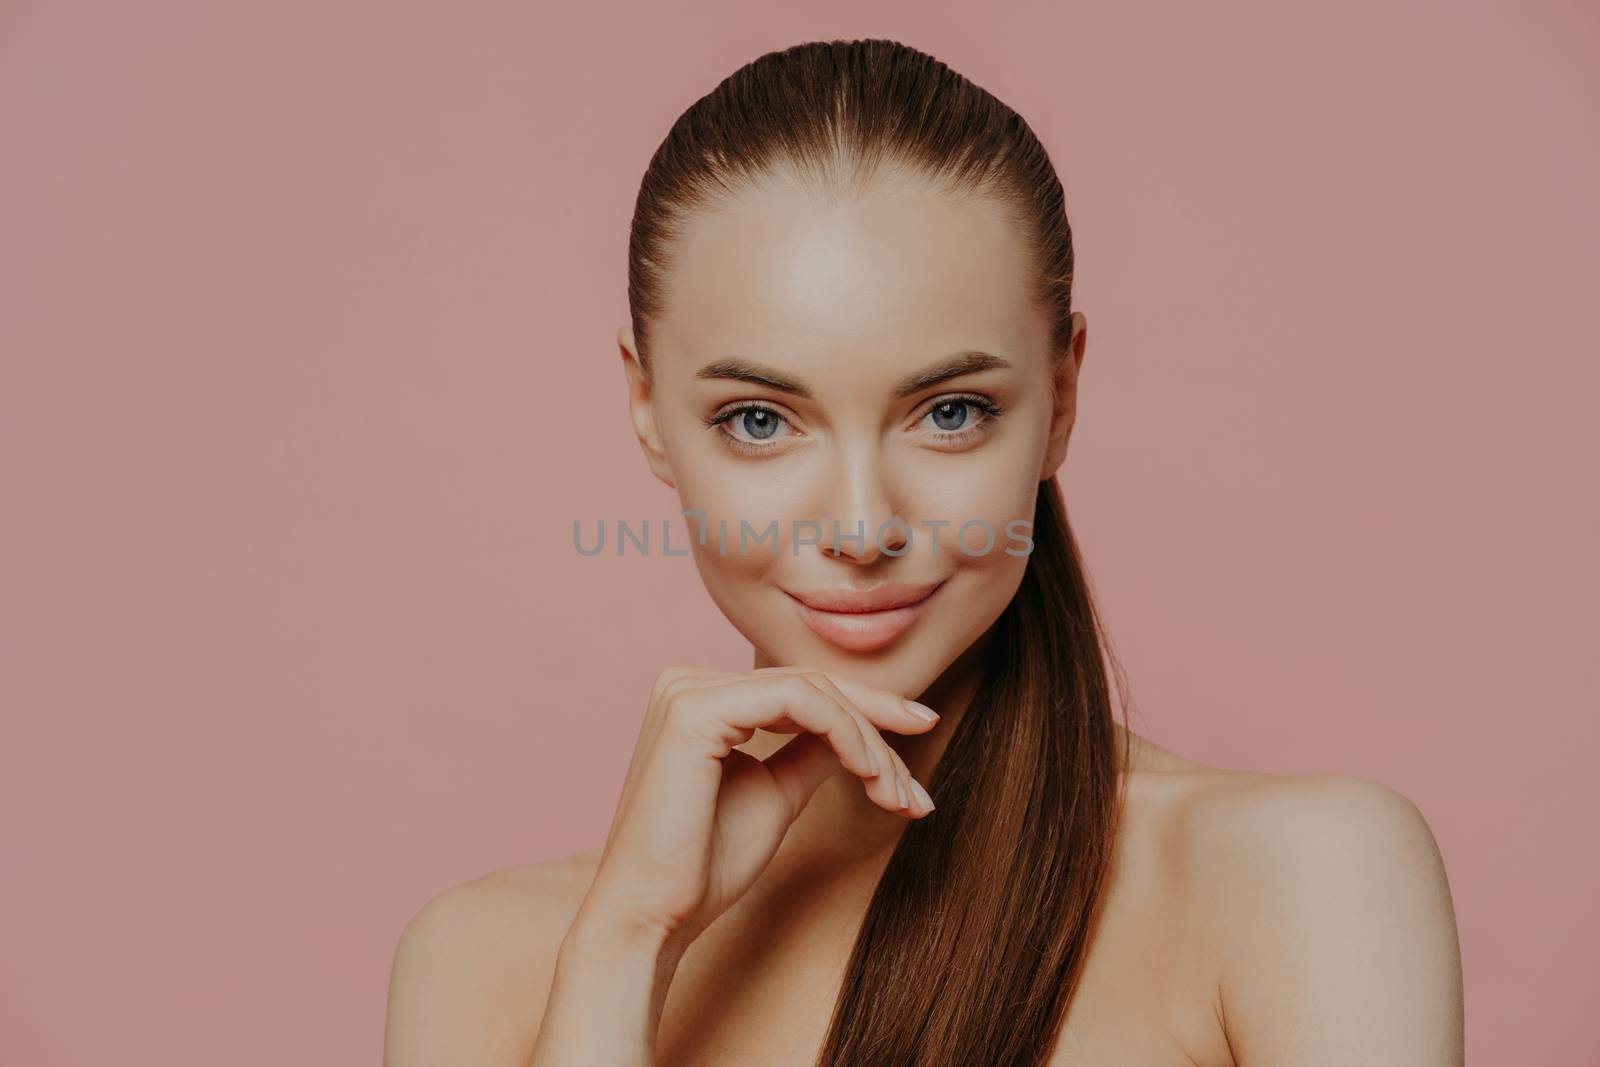 Skin care and anti aging procedures. Confident brunette young woman keeps hand under chin, has combed hair, clean fresh skin, enjoys beauty treatments, poses with naked body over pink background